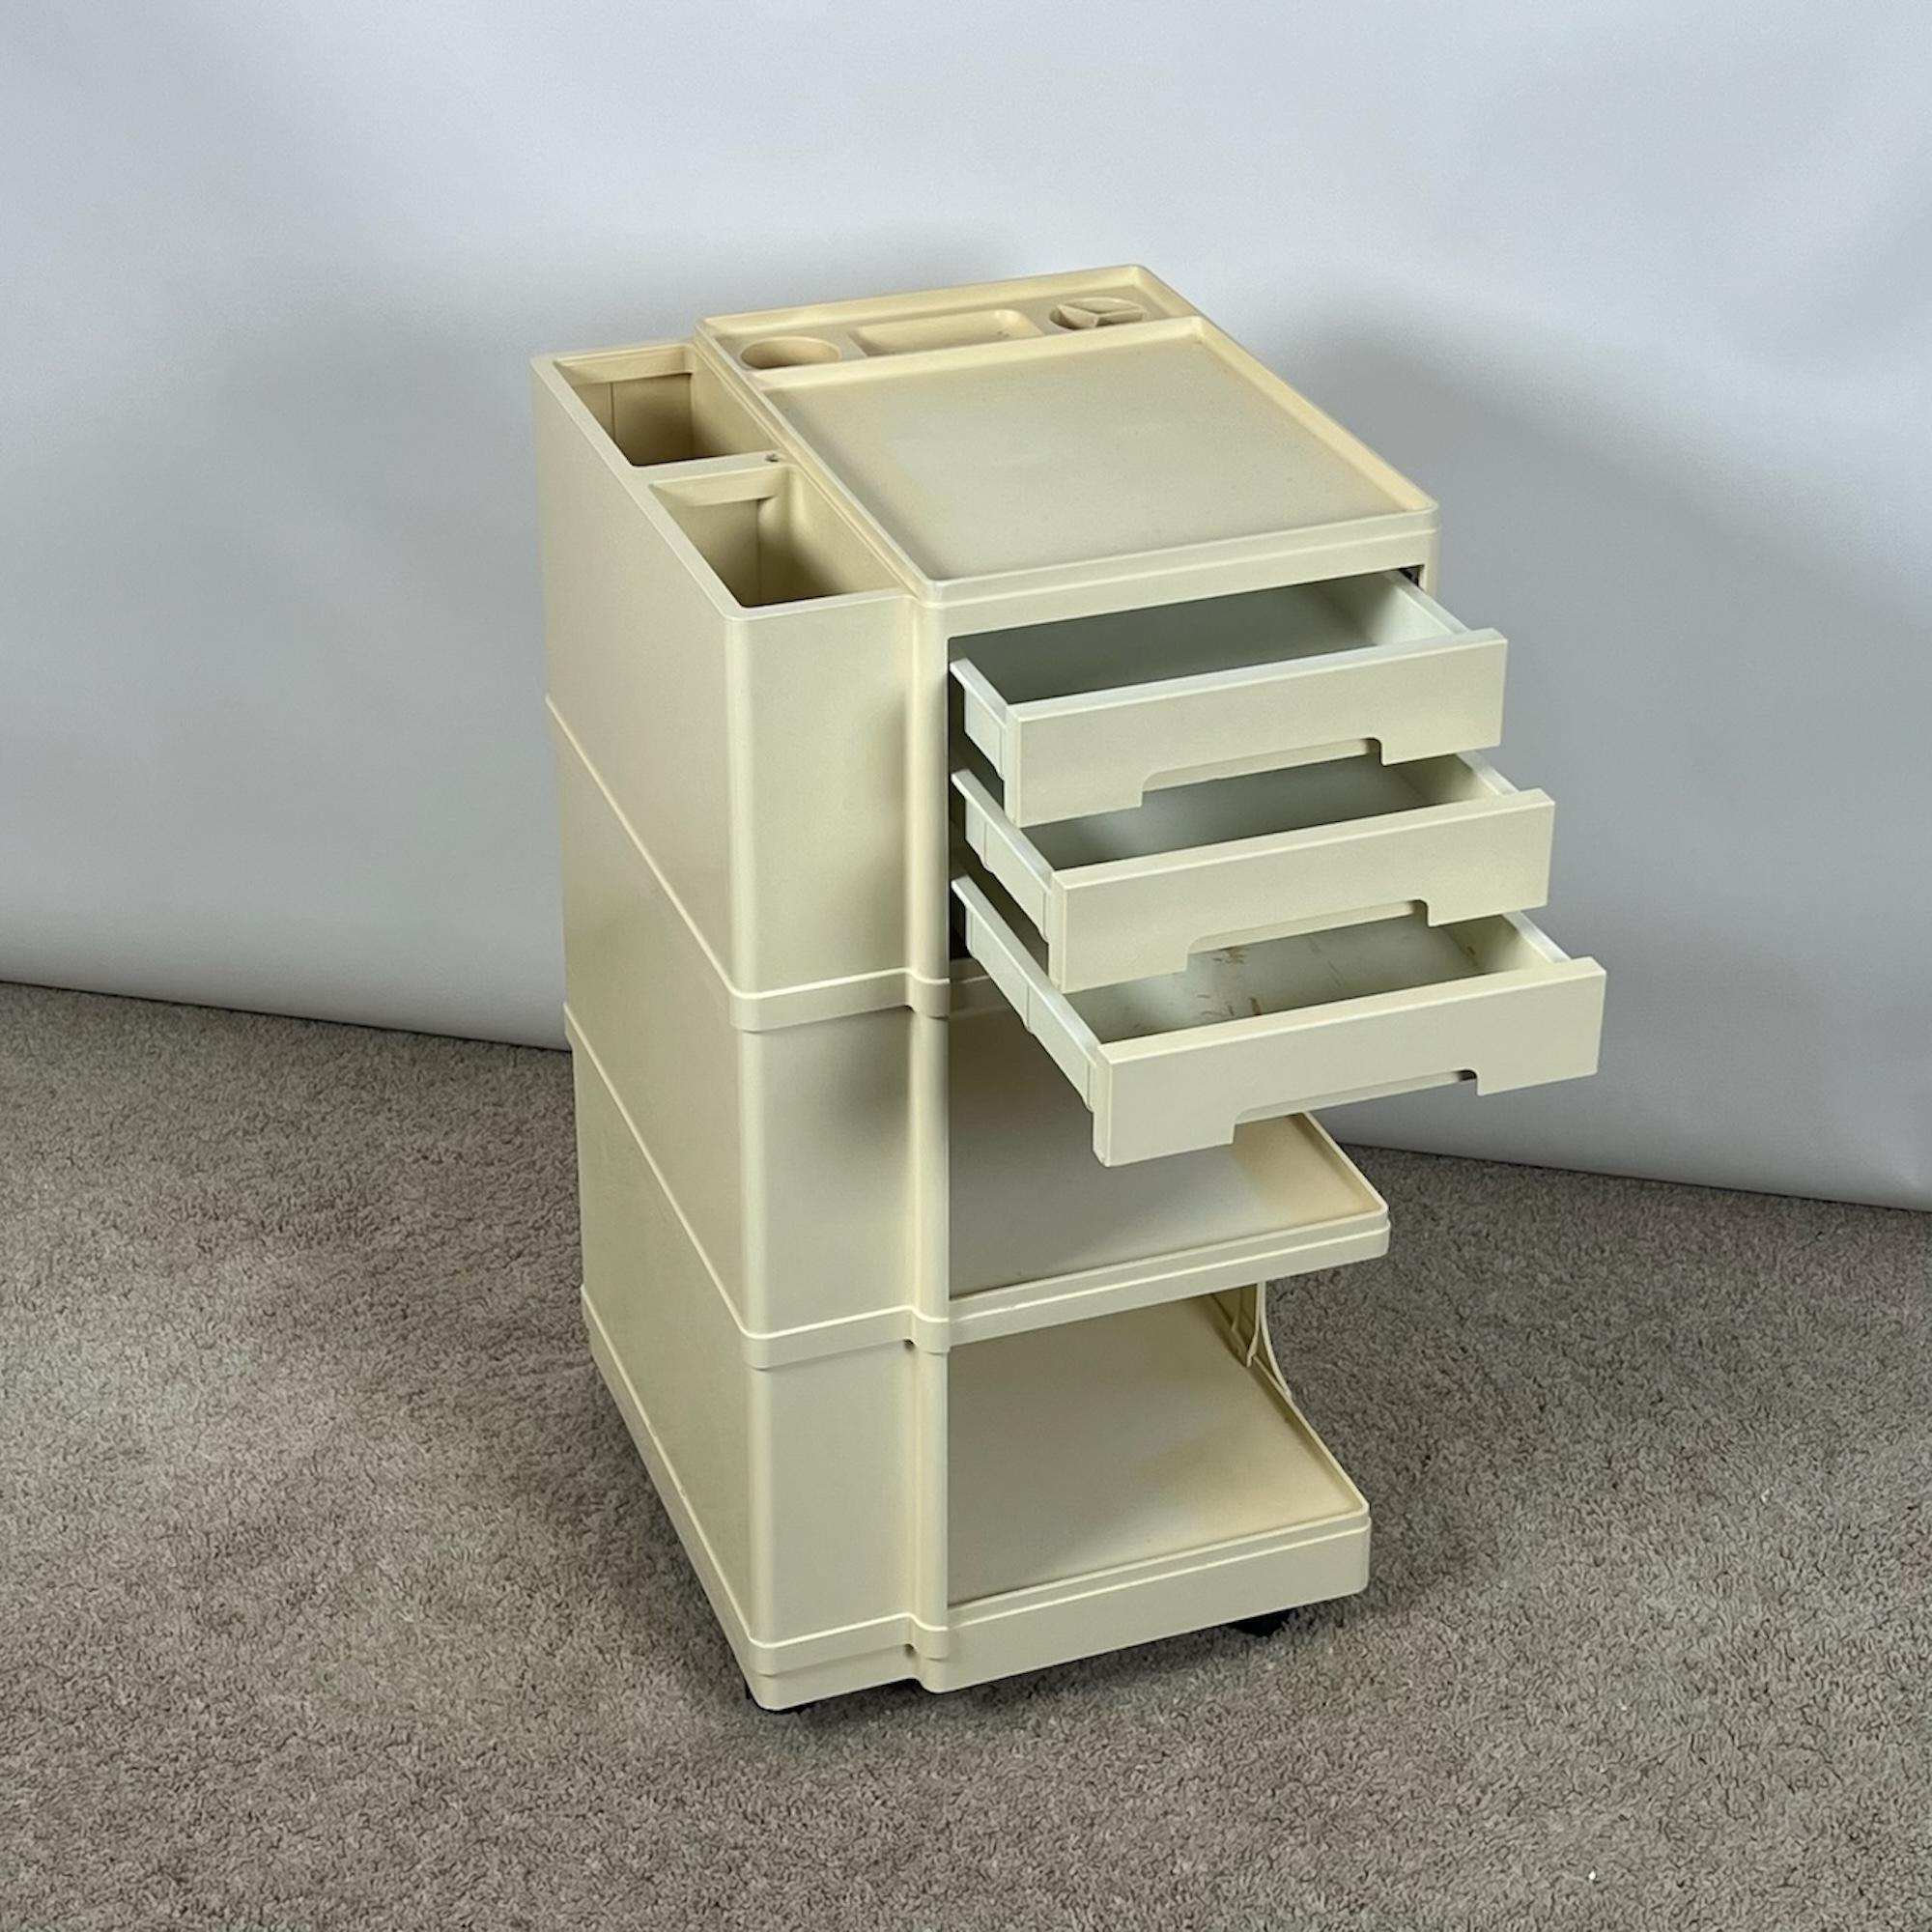 Immerse yourself in the futuristic charm of Space Age Furniture Design with this rare organizer cabinet, POLISTILE, designed by Giovanni Pelis for Neolt Italy in the 70s. A true vintage gem, POLISTILE was originally conceived as a work organizer for